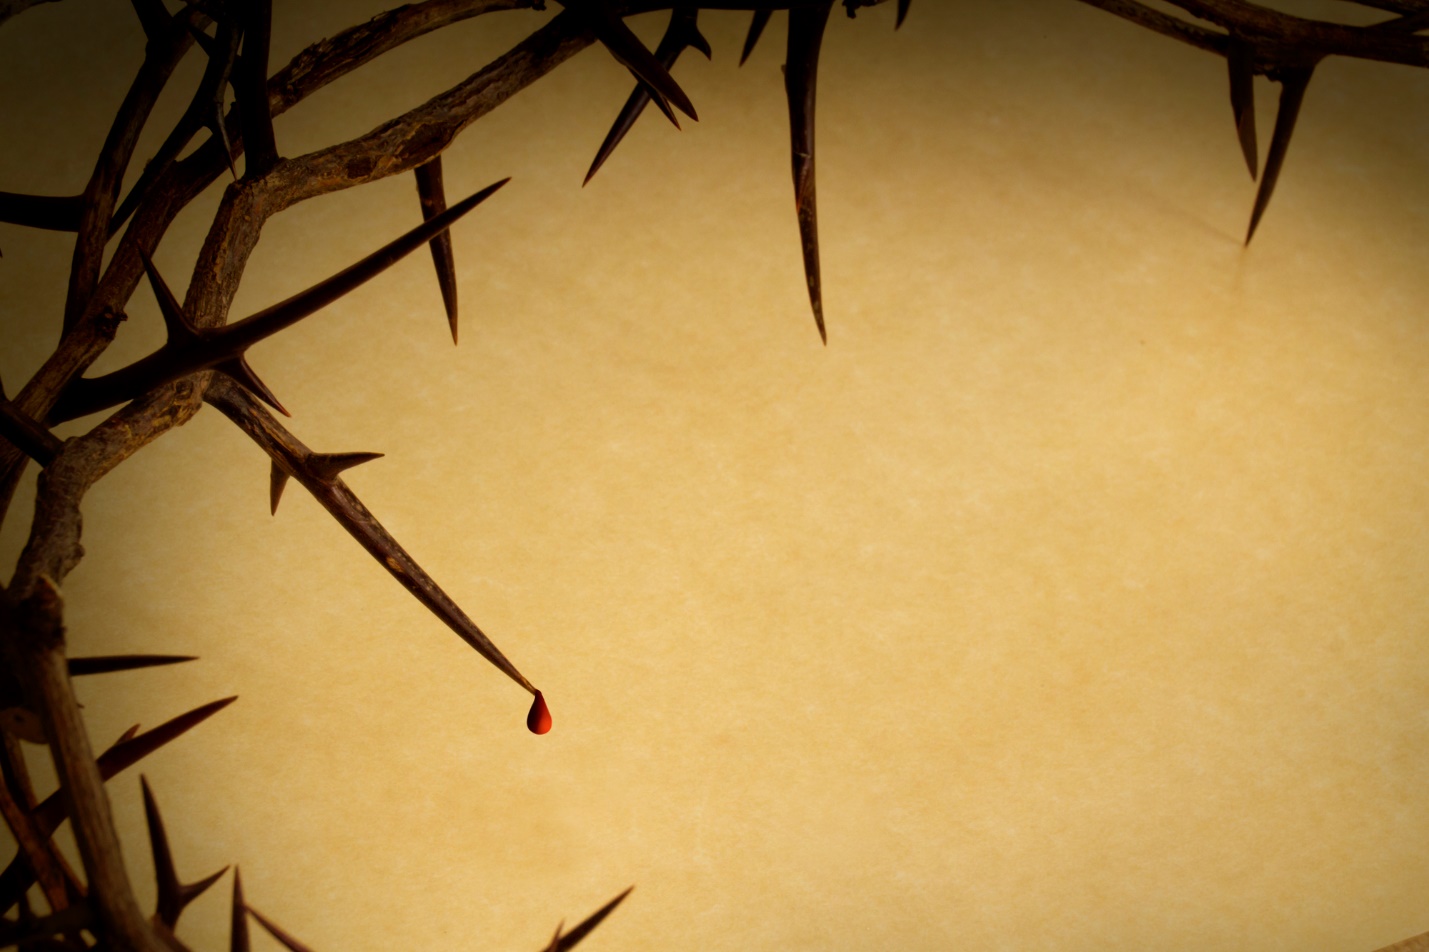 A close-up of a crown of thorns

Description automatically generated